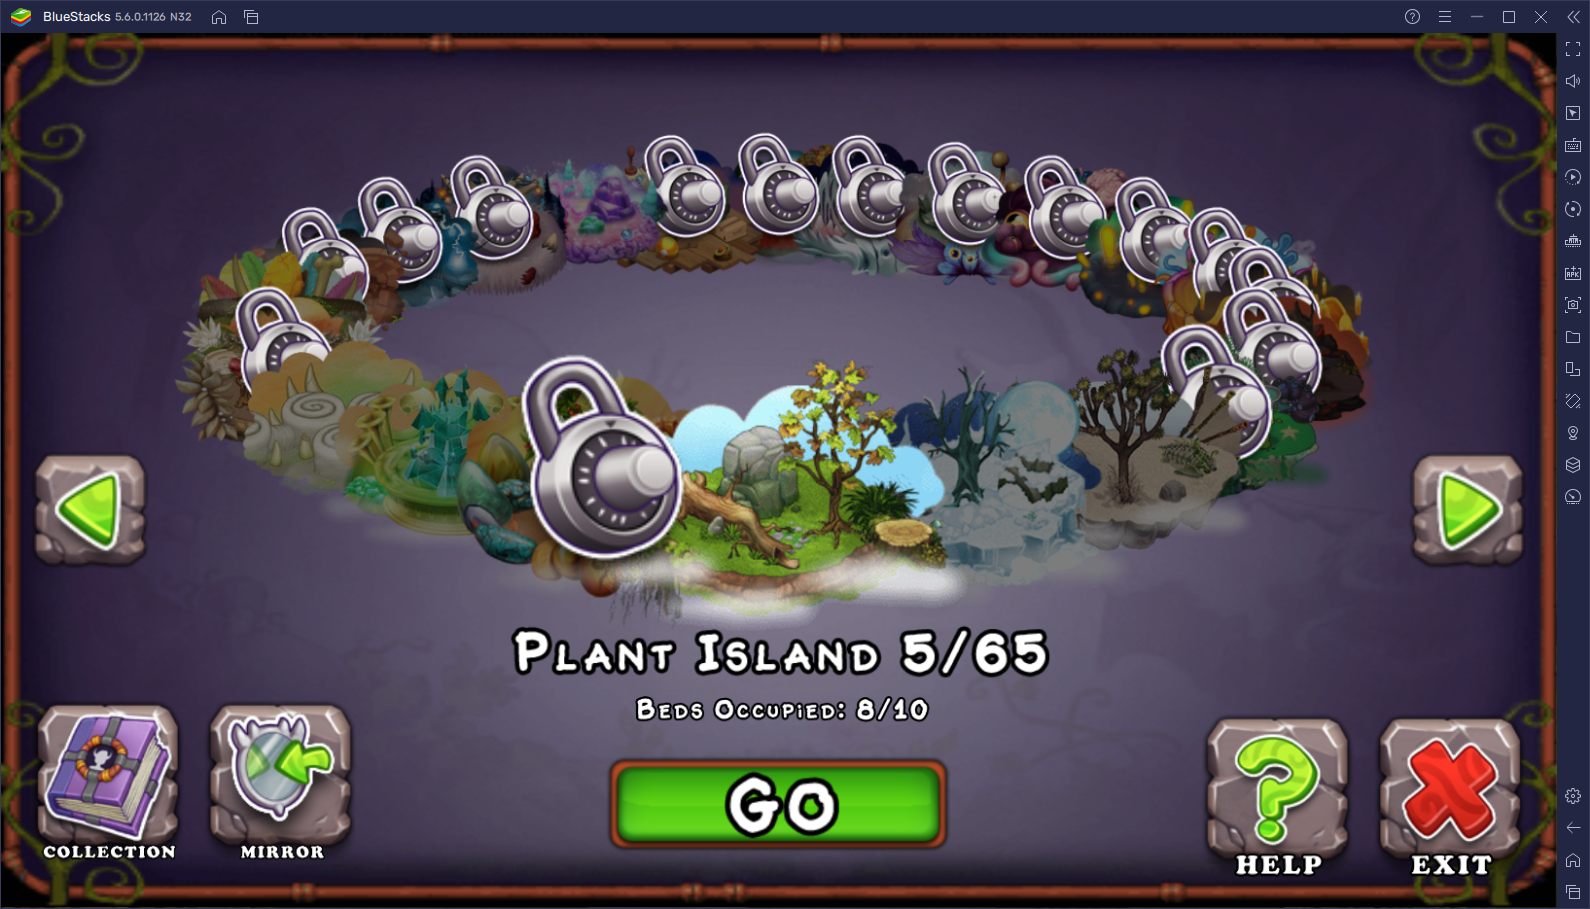 My Singing Monsters Beginner’s Guide on How To Obtain and Breed Monsters, And Grow Your Islands